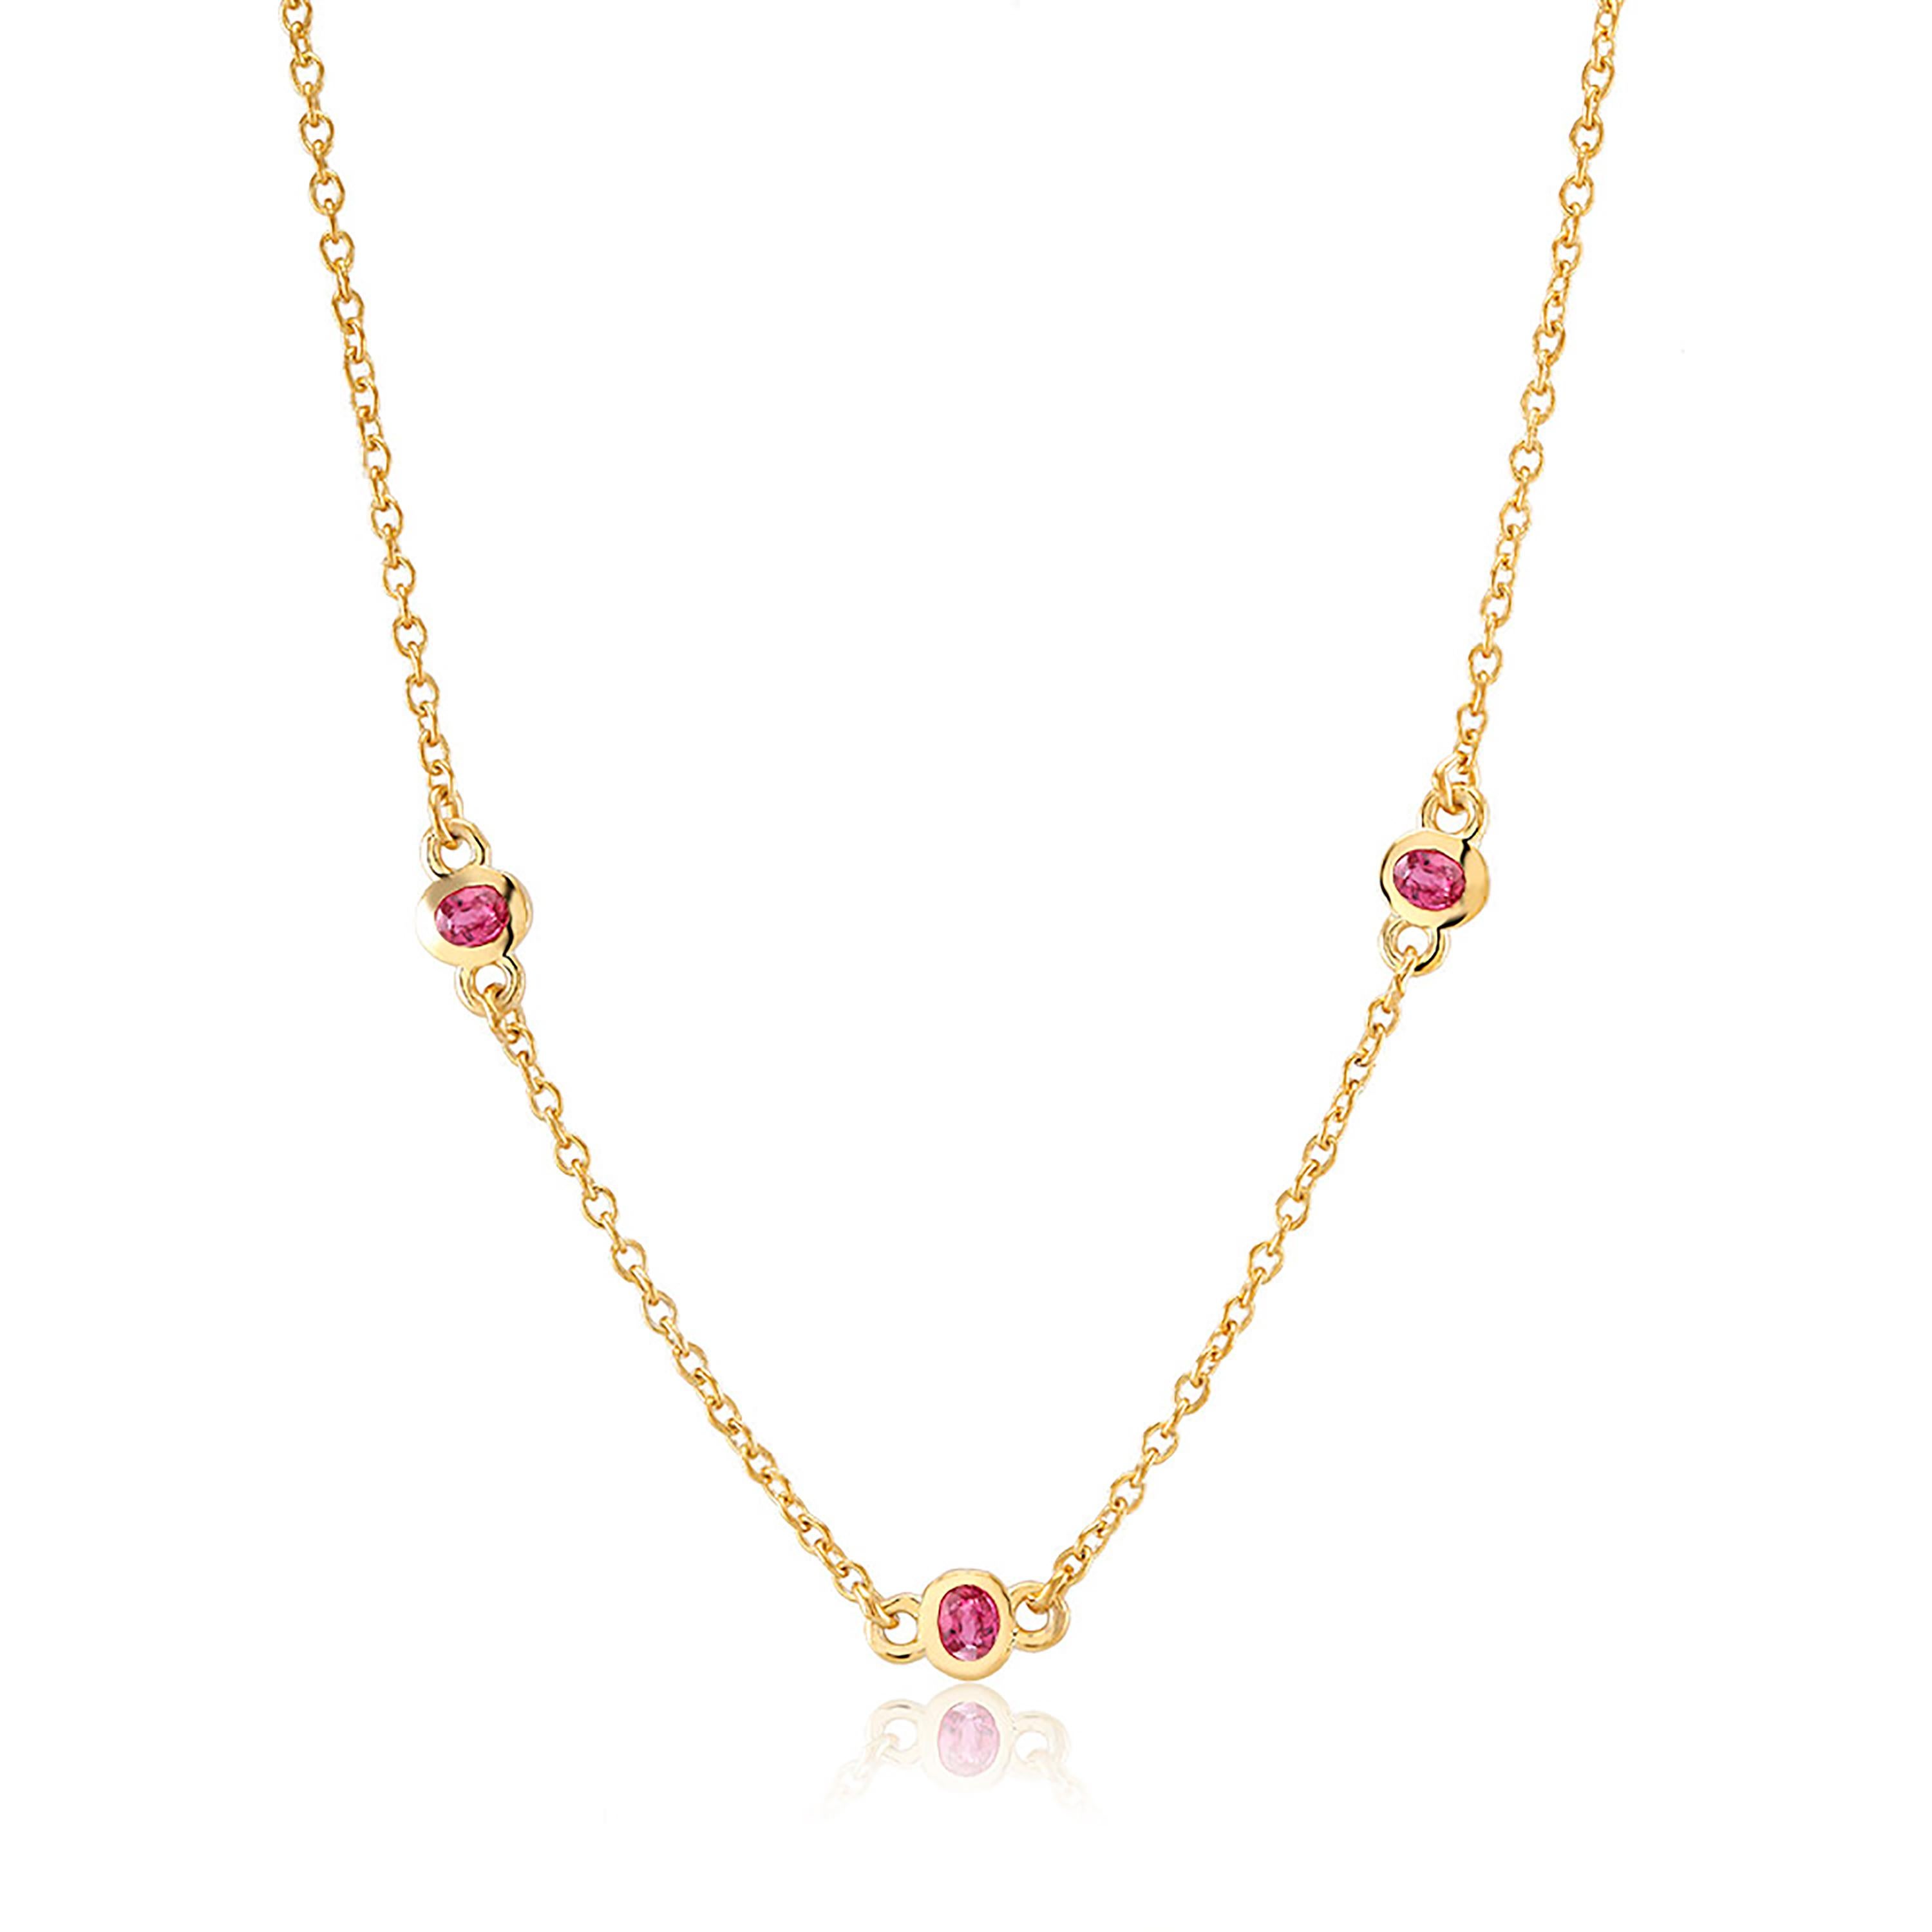 Contemporary Three Rubies Bezel Set Silver Pendant Necklace Yellow Gold-Plated